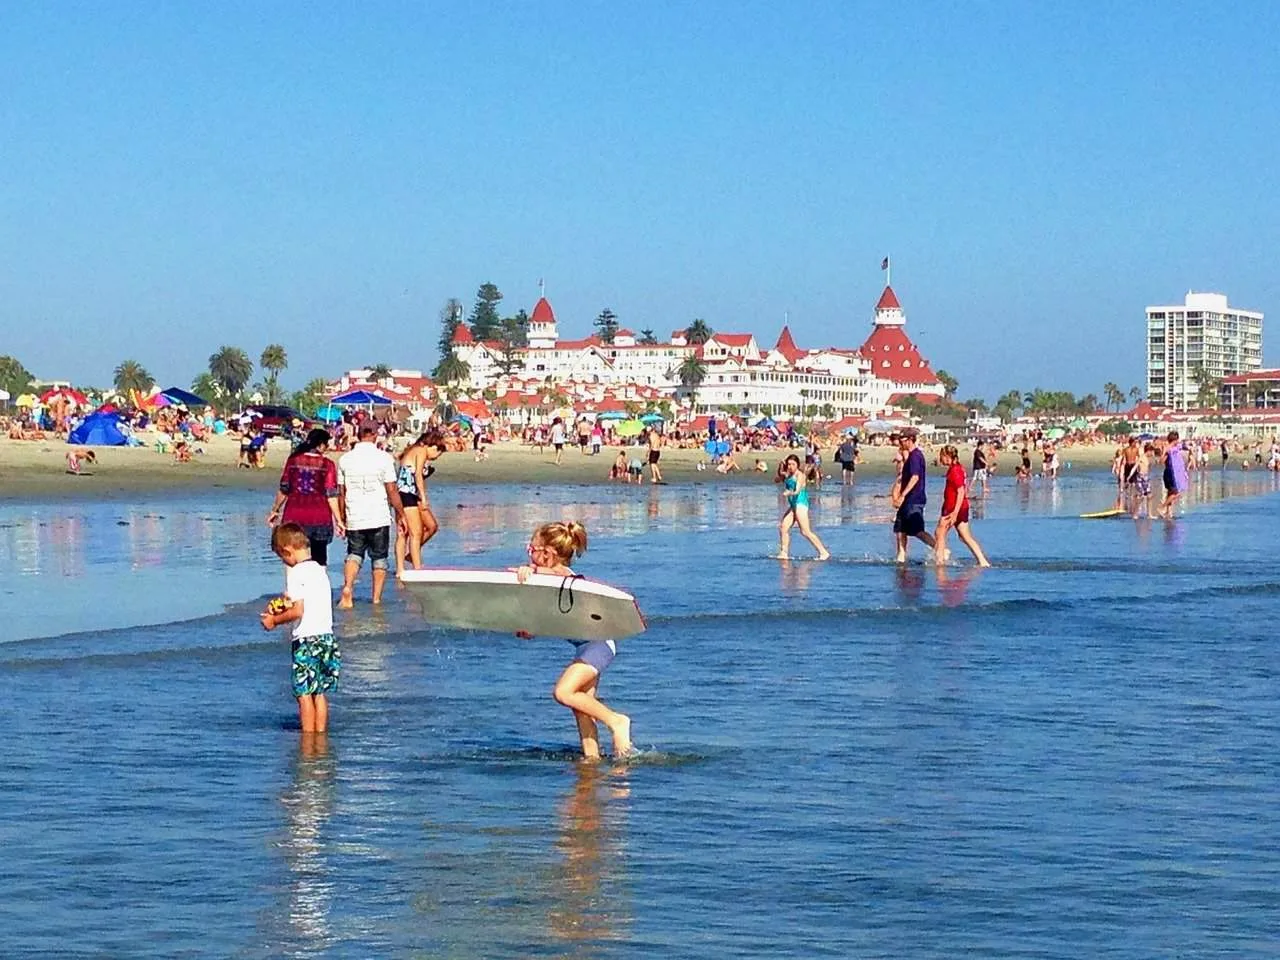 hotel del coronado is one of the best places to visit in San Diego with kids